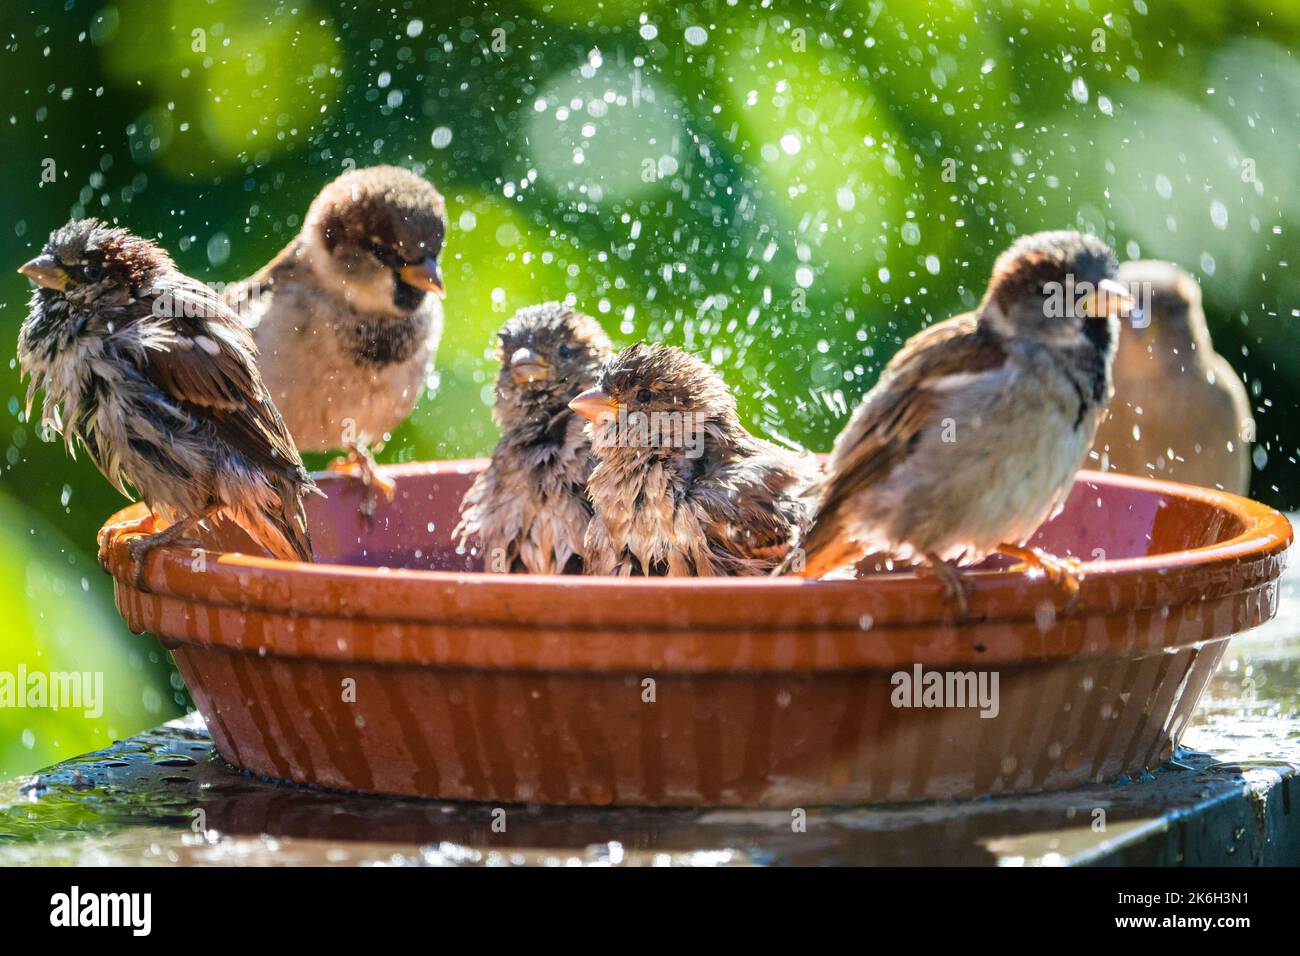 House sparrows bathing and splashing water in a birdbath on a hot summer day. Stock Photo